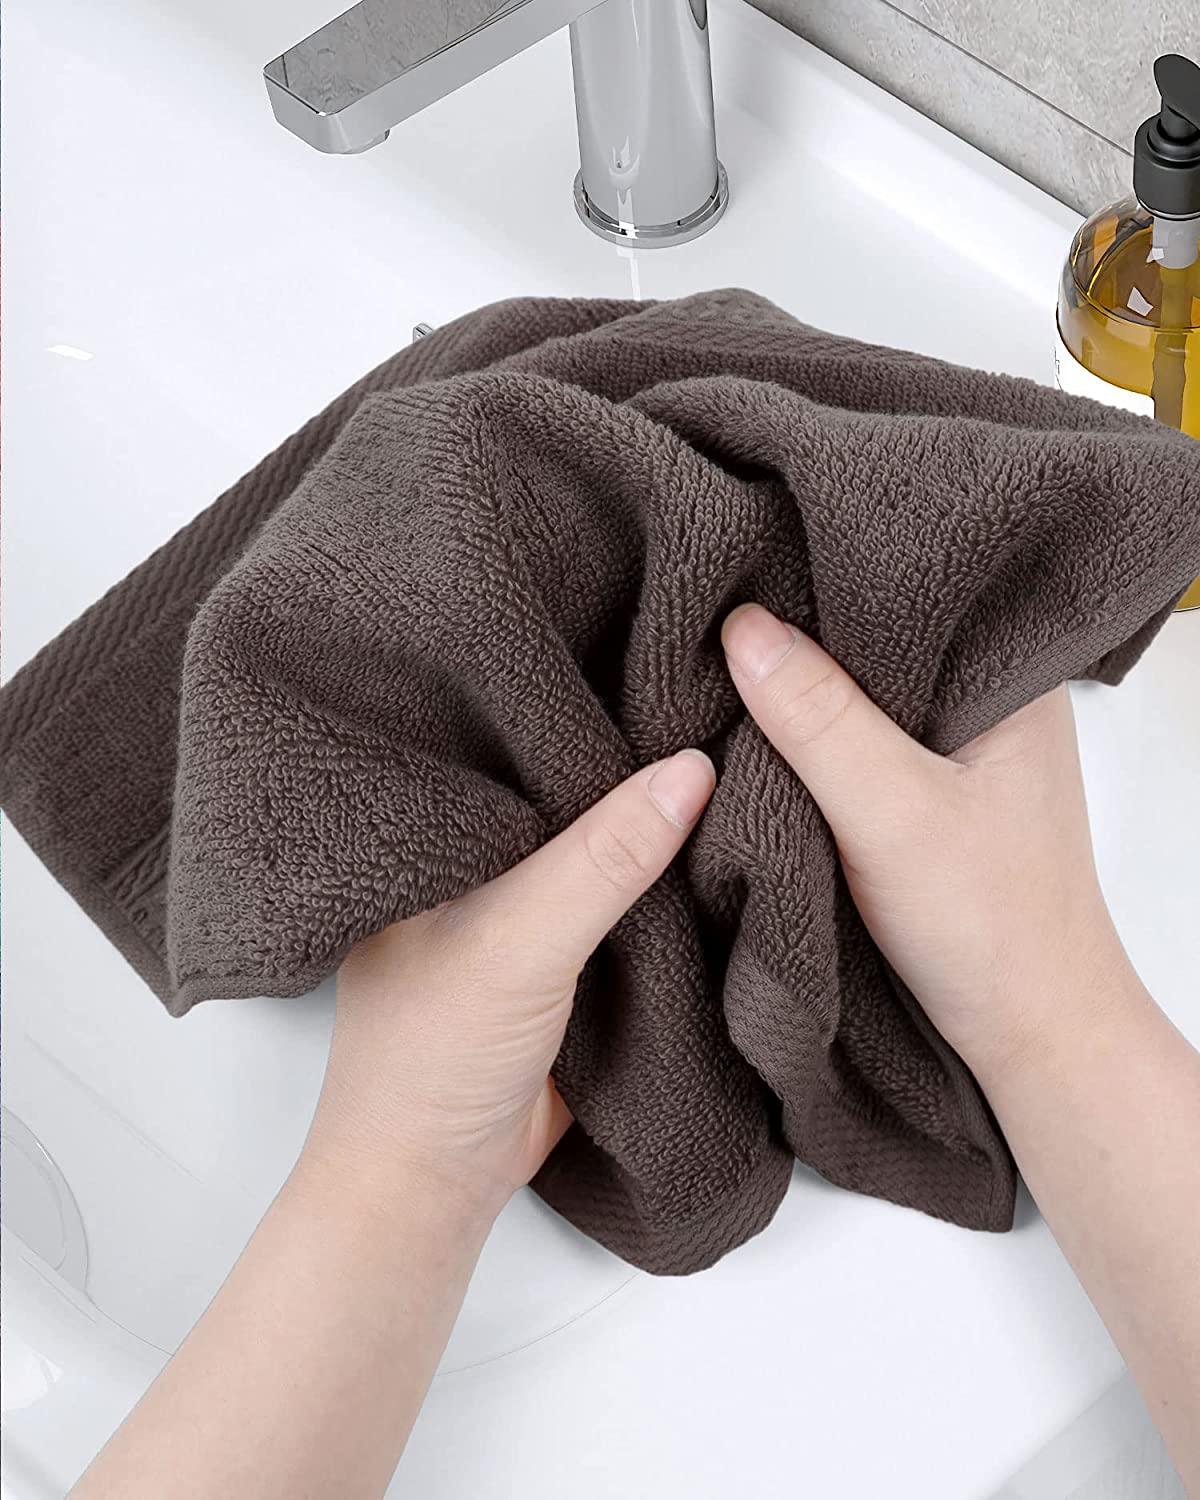  Cleanbear Cotton Hand Towel Set 6-Pack Ultra Soft Hand Towels  with Assorted Colors (13 x 29 Inches) Lightweight and Quick Dry Bathroom  Towels : Home & Kitchen